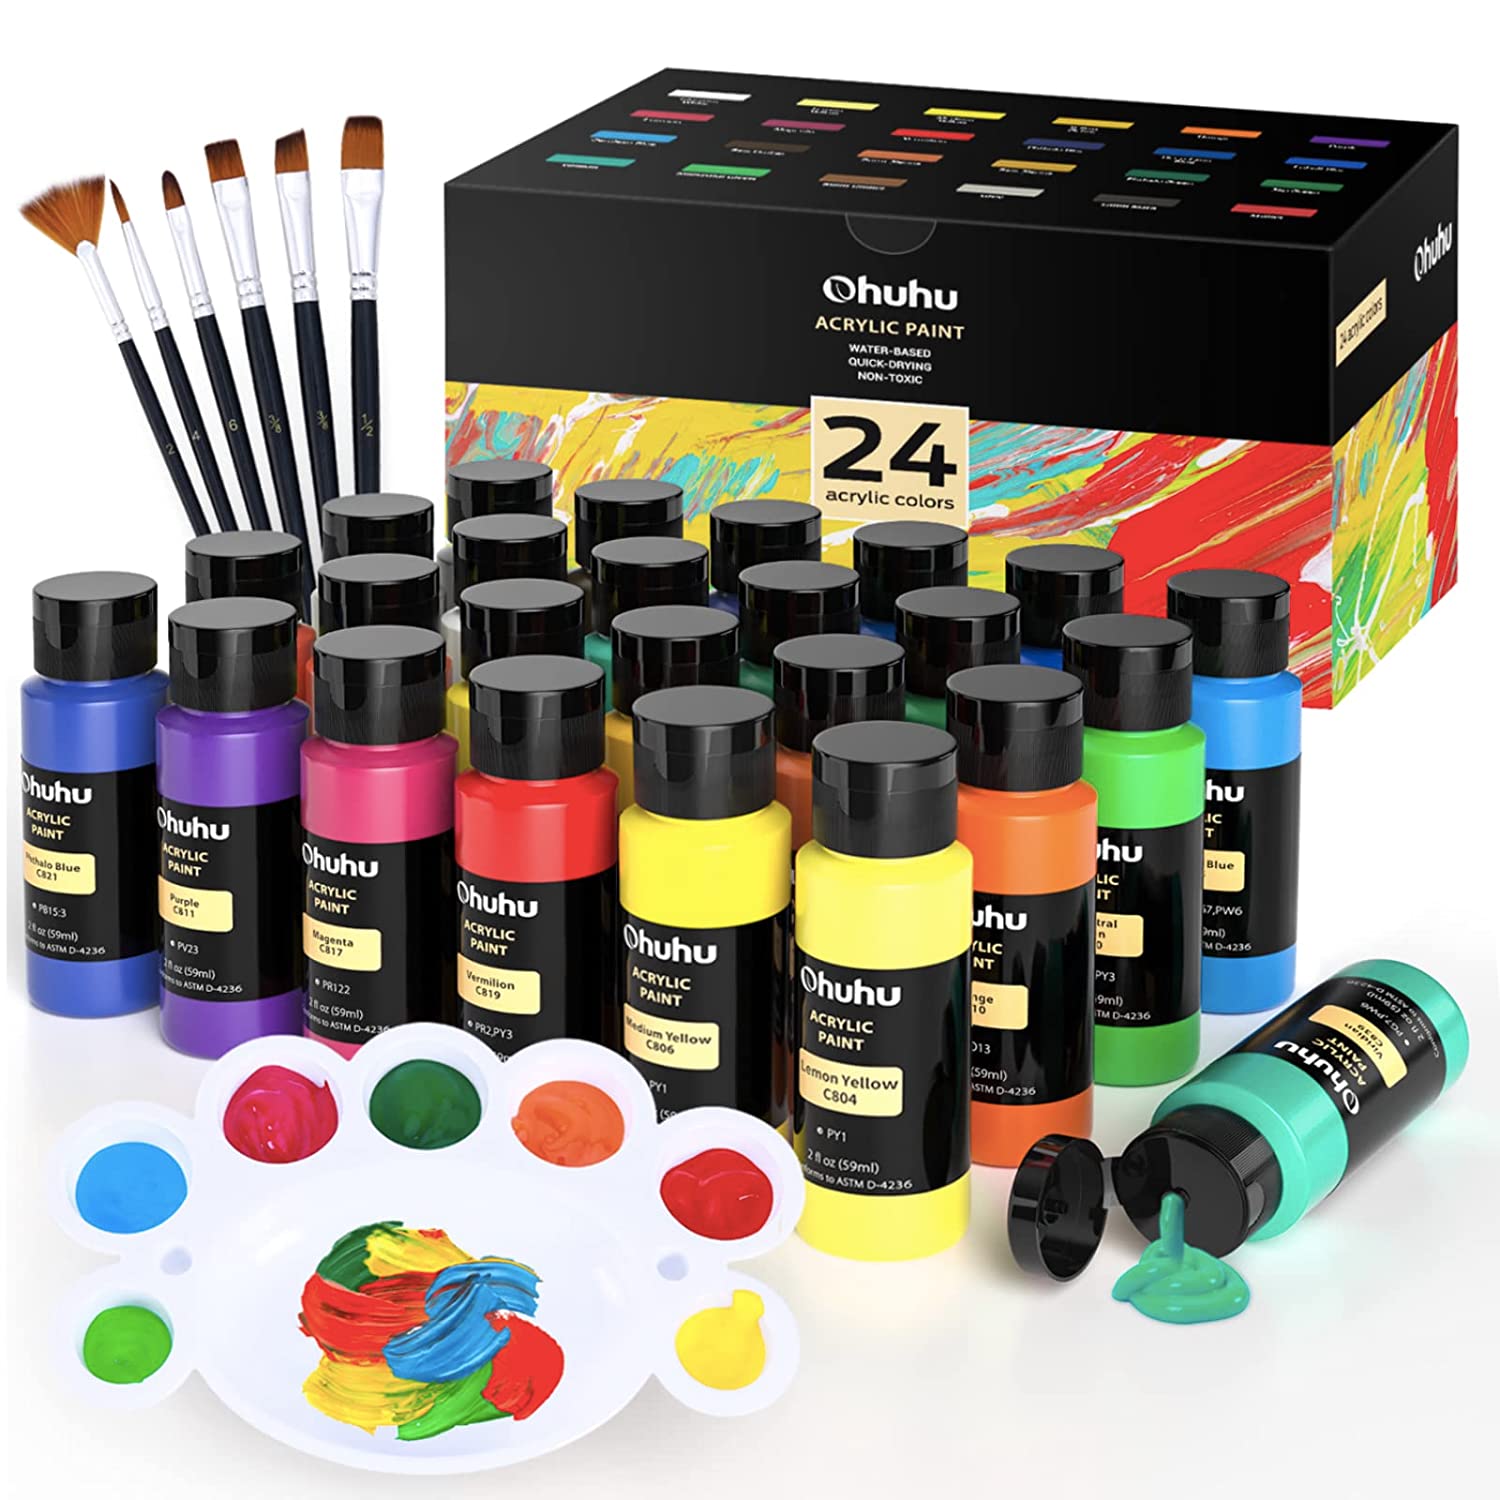 Acrylic Paint Set with 12 Brushes, 24 Colors (59Ml, 2Oz) Art Craft